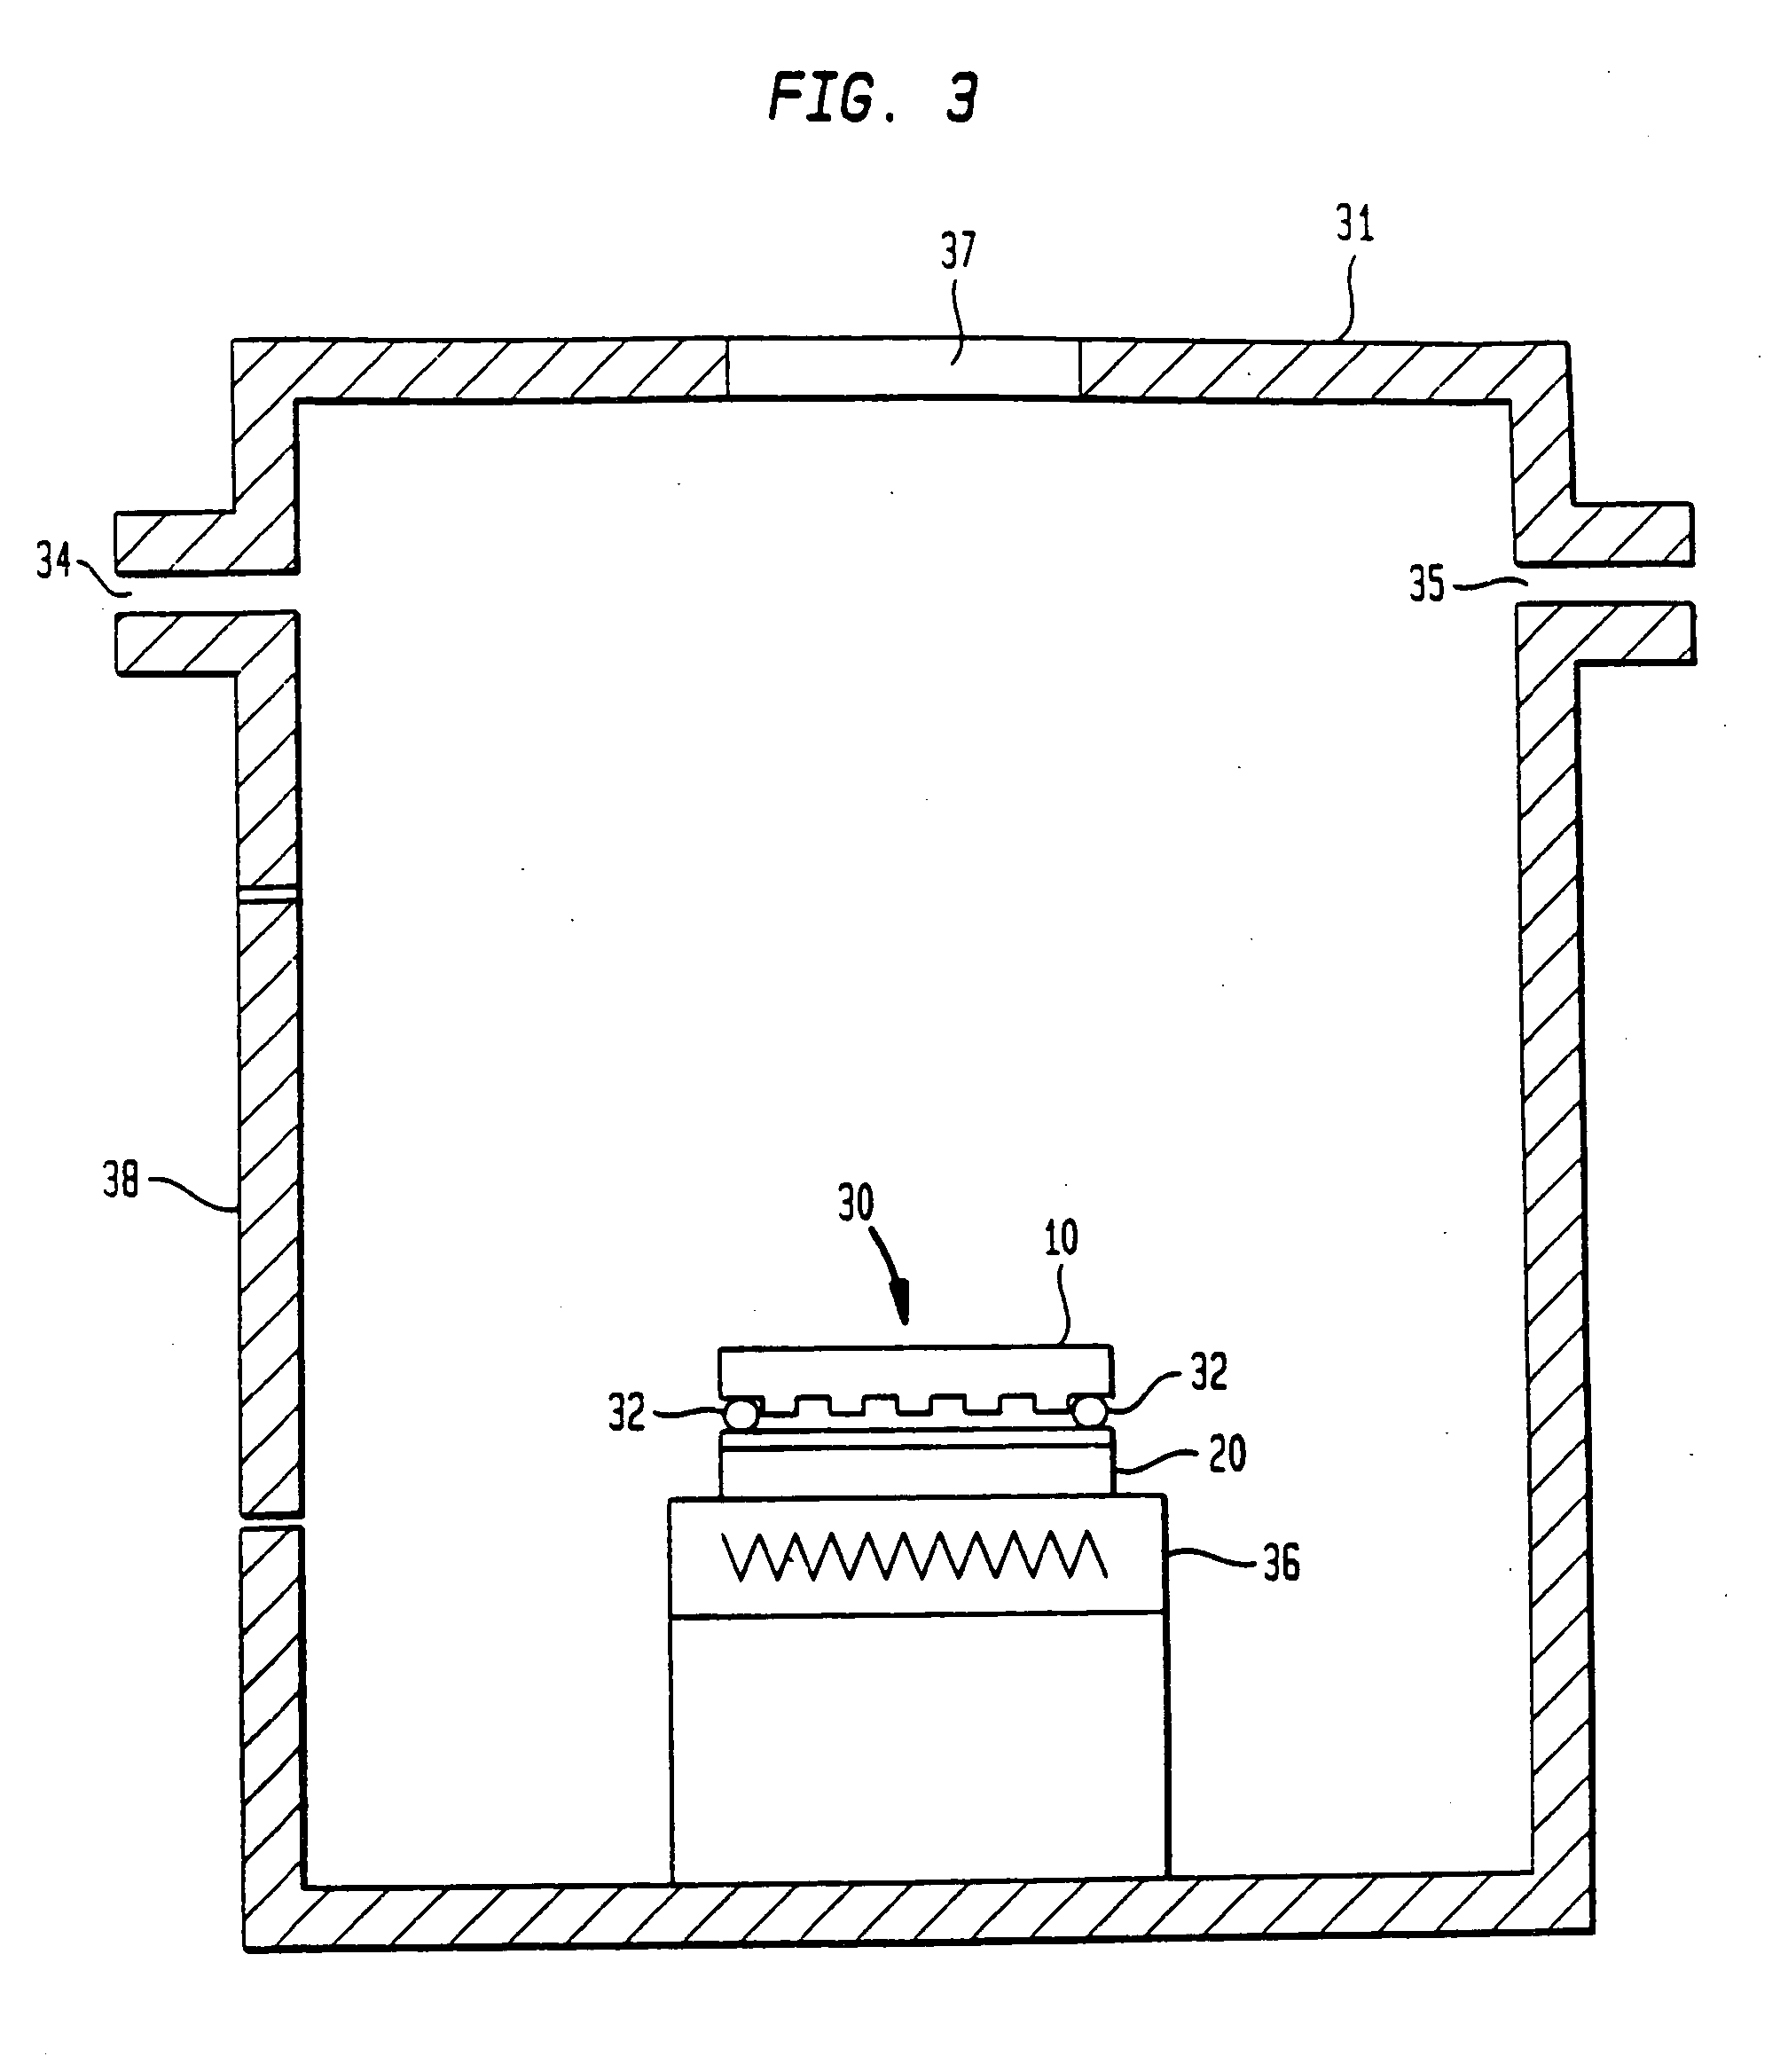 Apparatus for double-sided imprint lithography